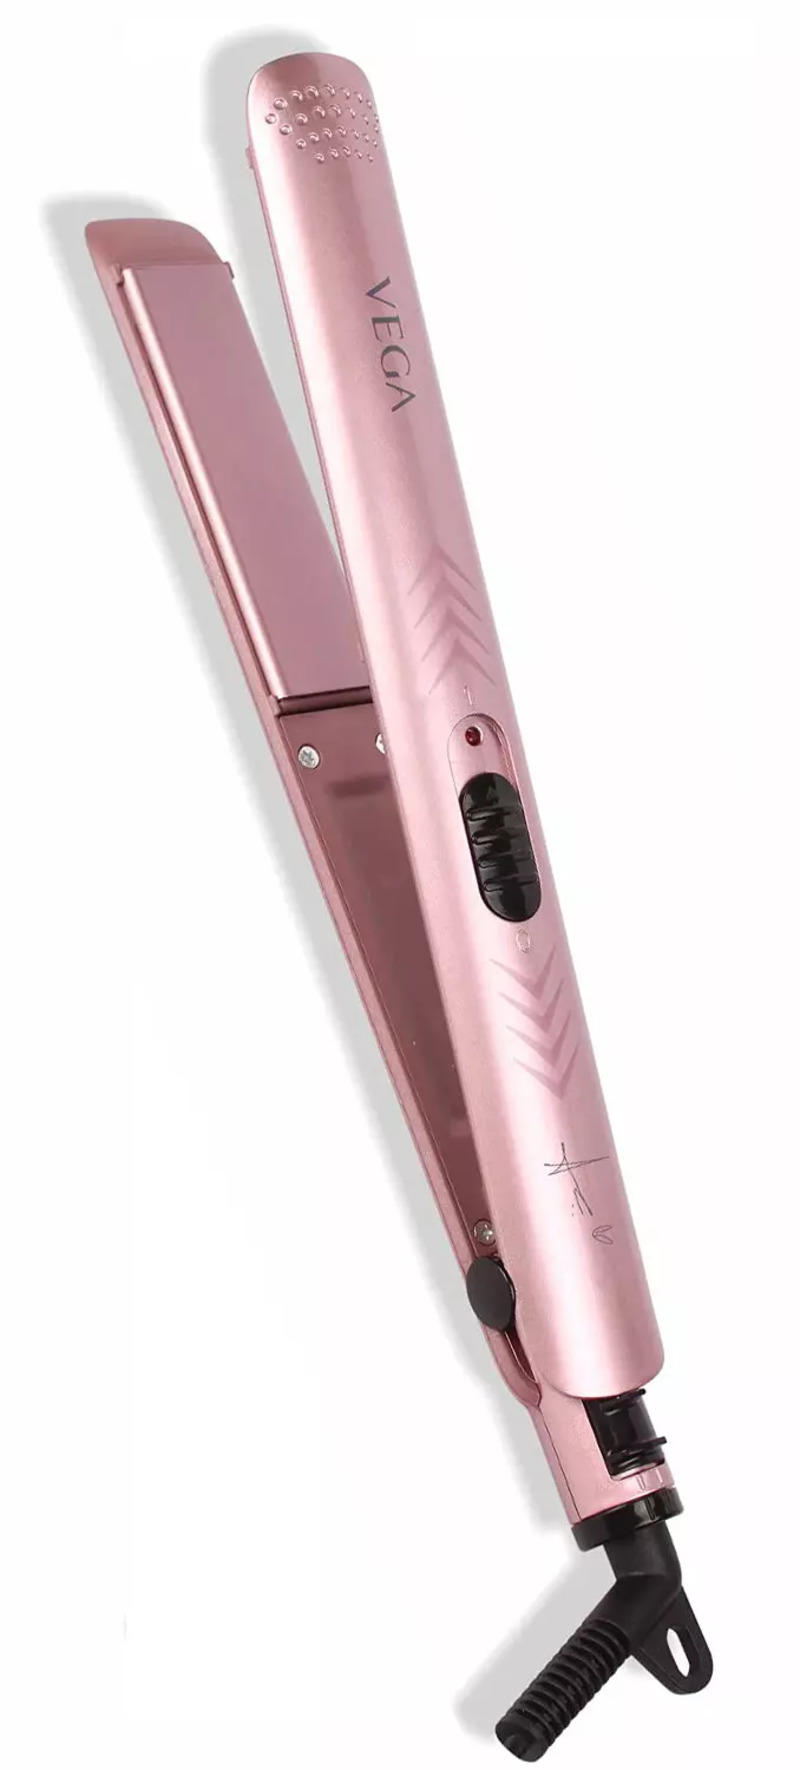 Vega VHSH-28 Hair Straightner (Pink) Price in India, Specifications and  Review